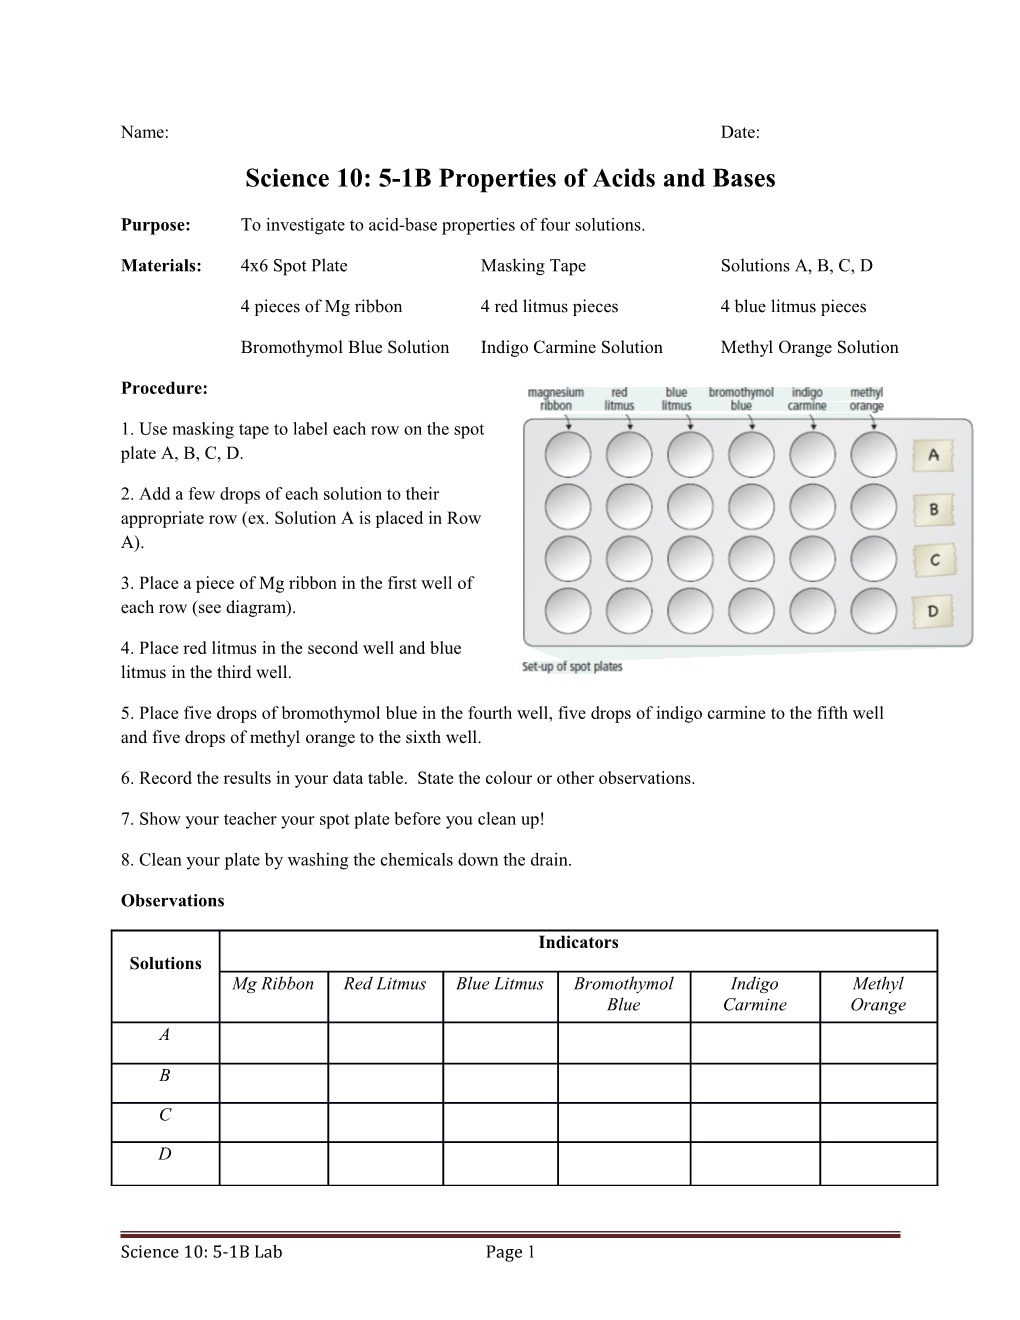 Science 10: 5-1B Properties of Acids and Bases